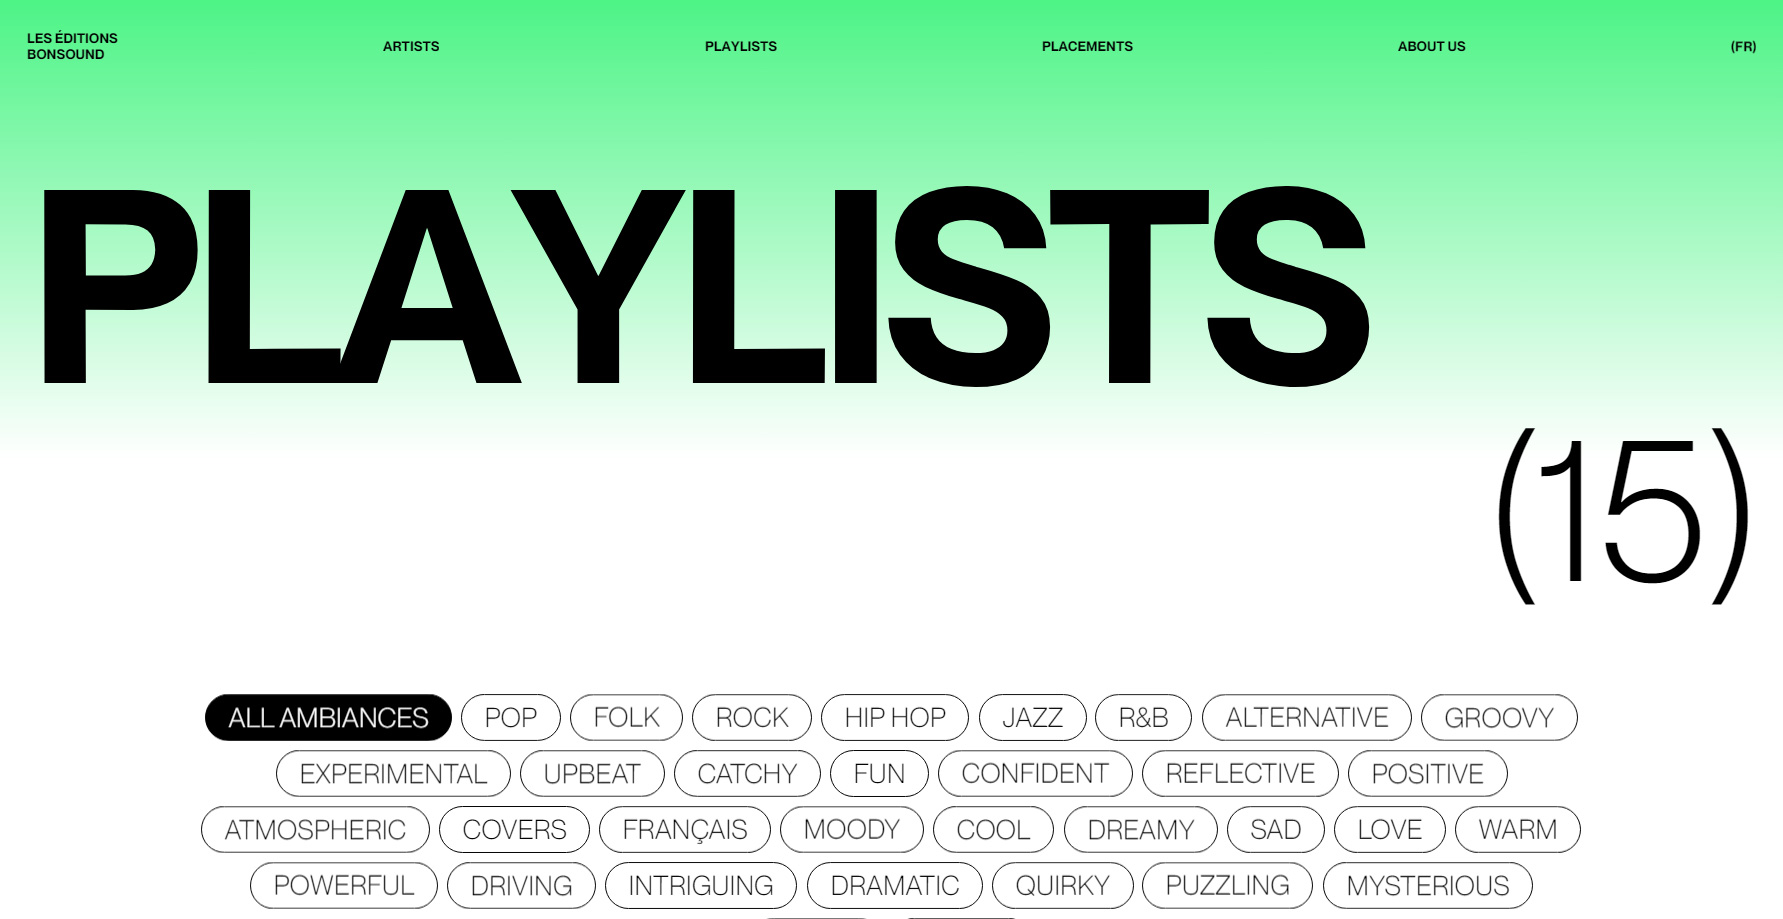 Les Éditions Bonsound - Website of the Day